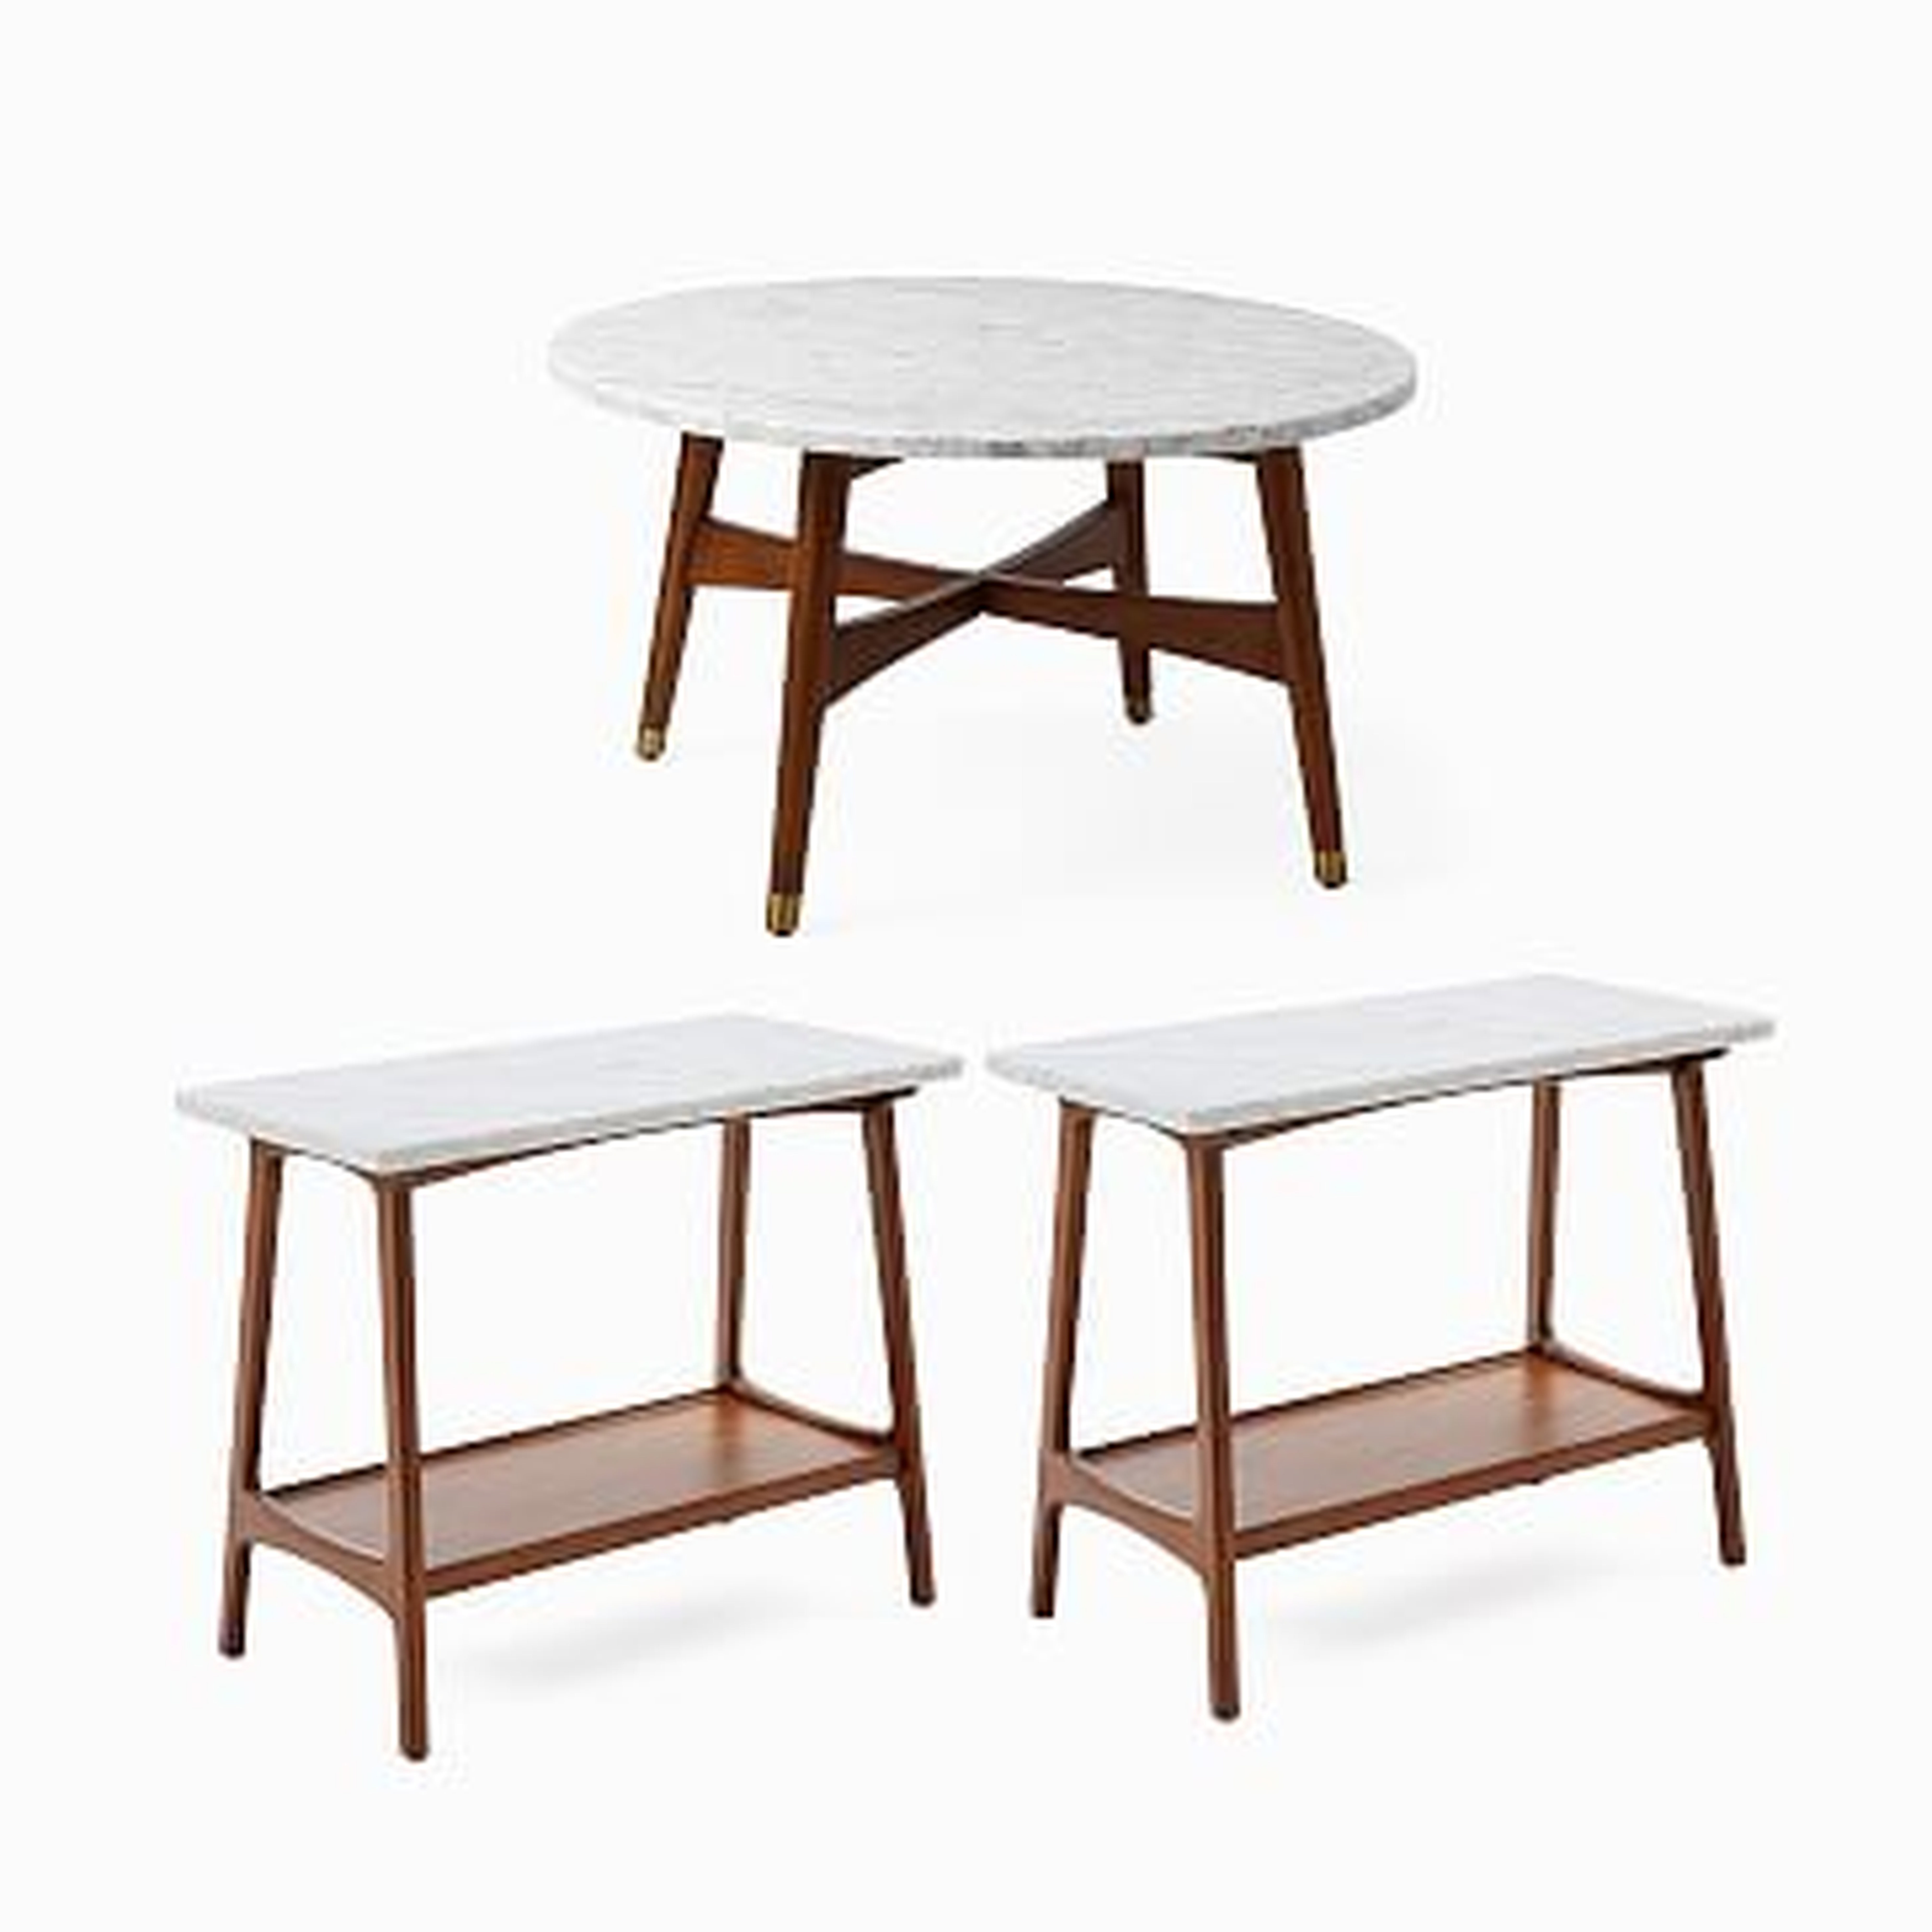 Reeve Mid-Century Round Coffee Table & 2 Side Tables Set - West Elm